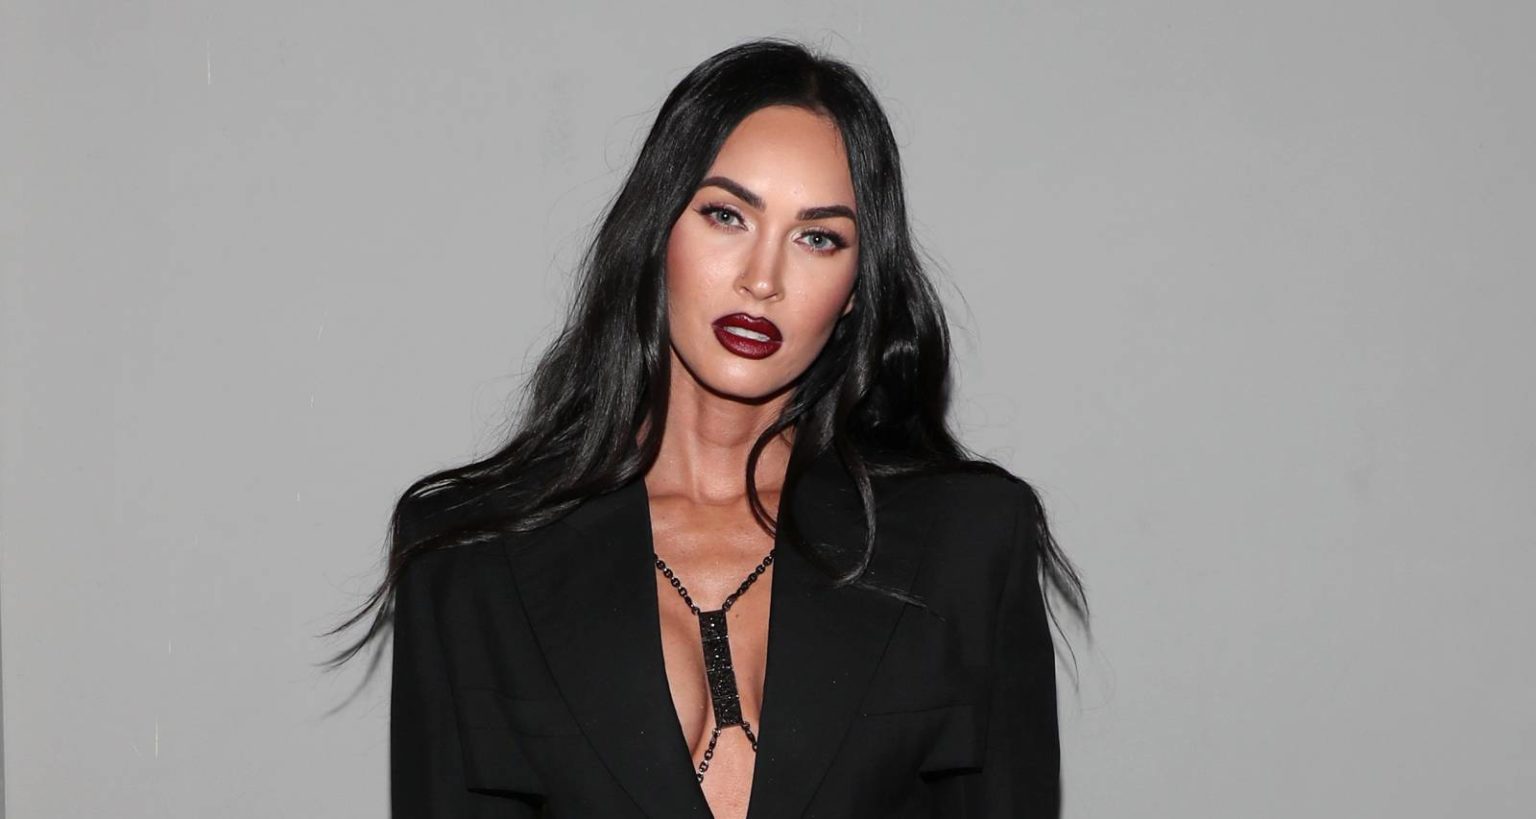 Megan Fox’s Dating Timeline: Who Is She Dating Now?